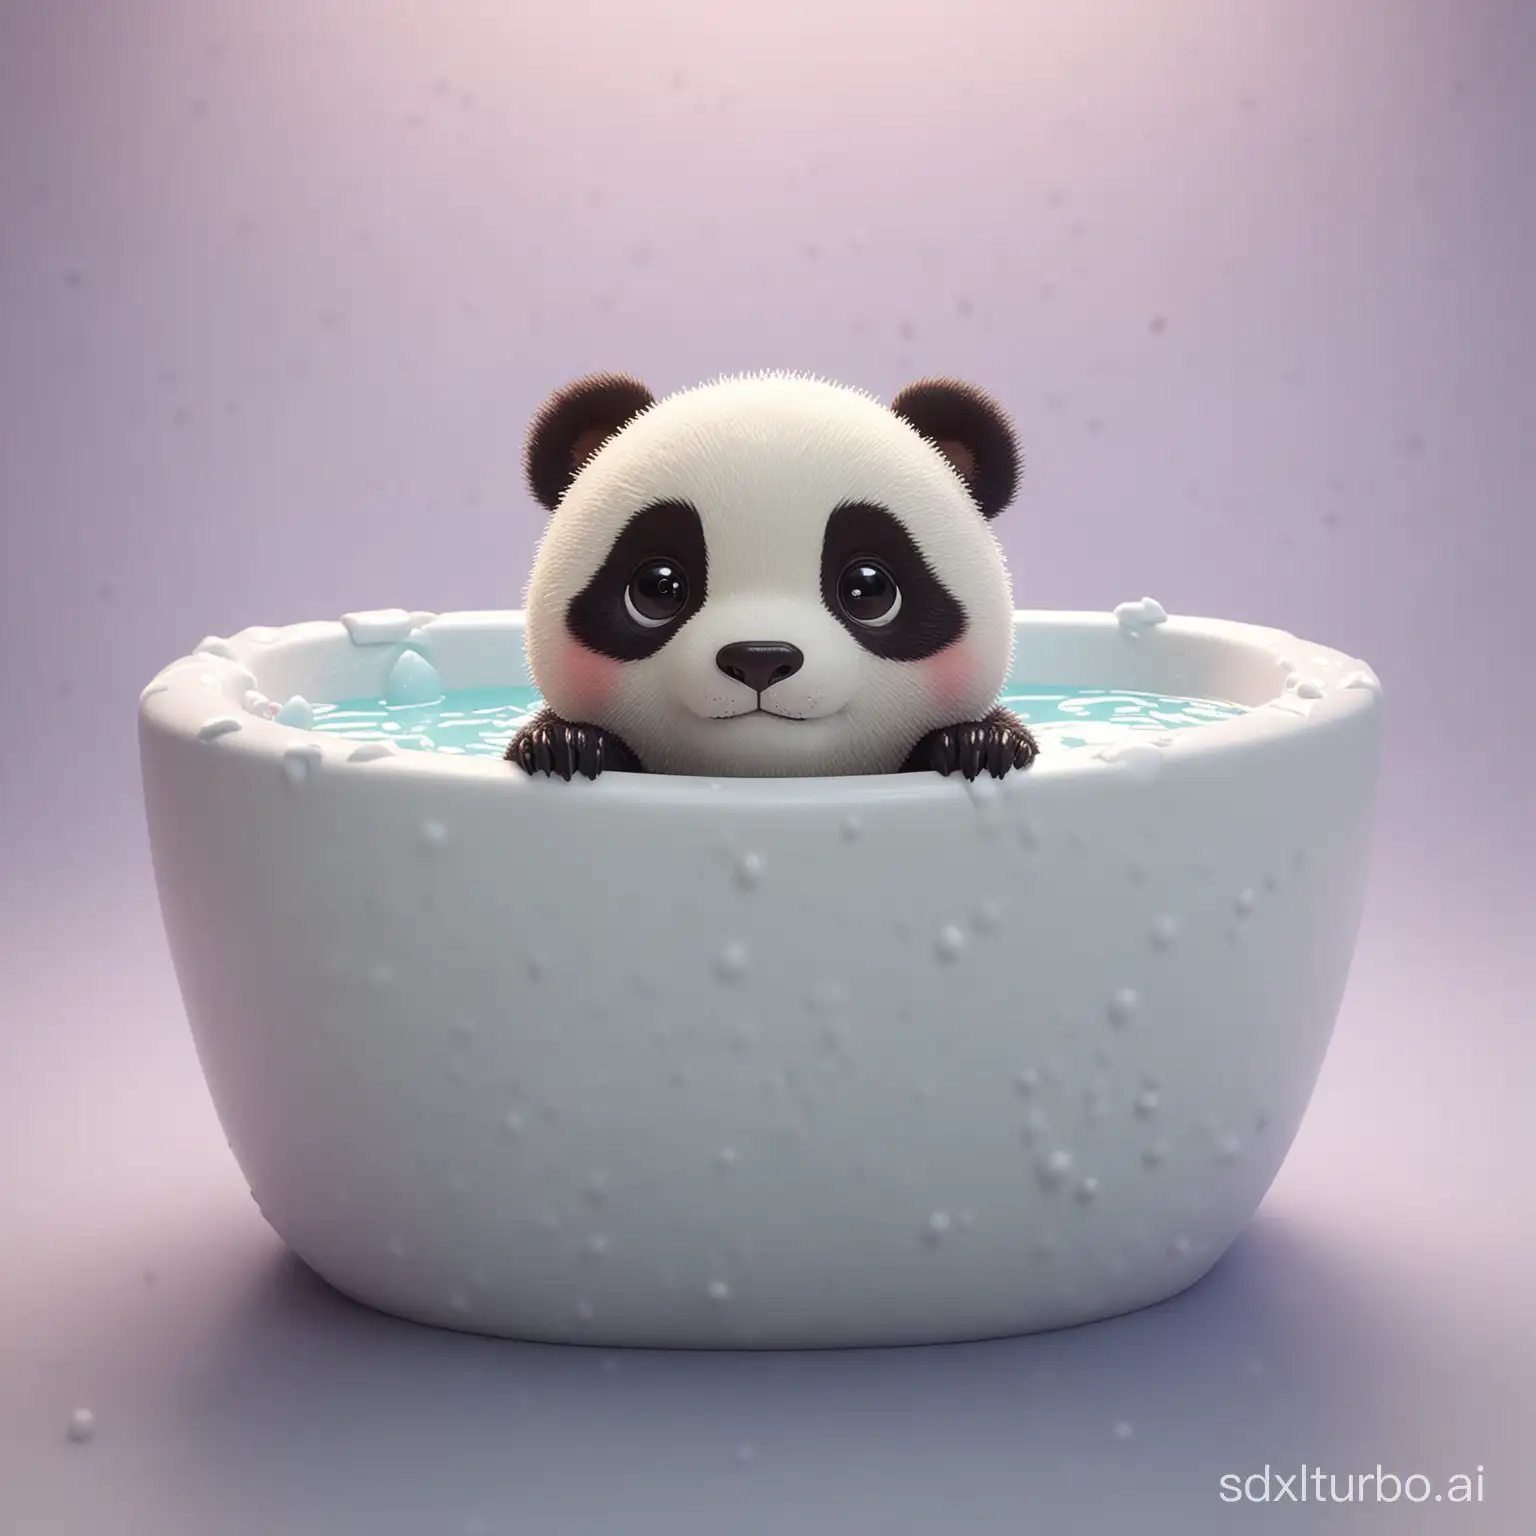 miniture, tiny cute panda ball toy, inside of bathtub, plastic texture, soft smooth lighting, soft pastel colors, skottie young, blank background, 3d blender render, polycount, modular constructivism, pop surrealism, physically based rendering, cinematic, highly detailed, real, sharp focus, very coherent, intricate, innocent, artistic, color